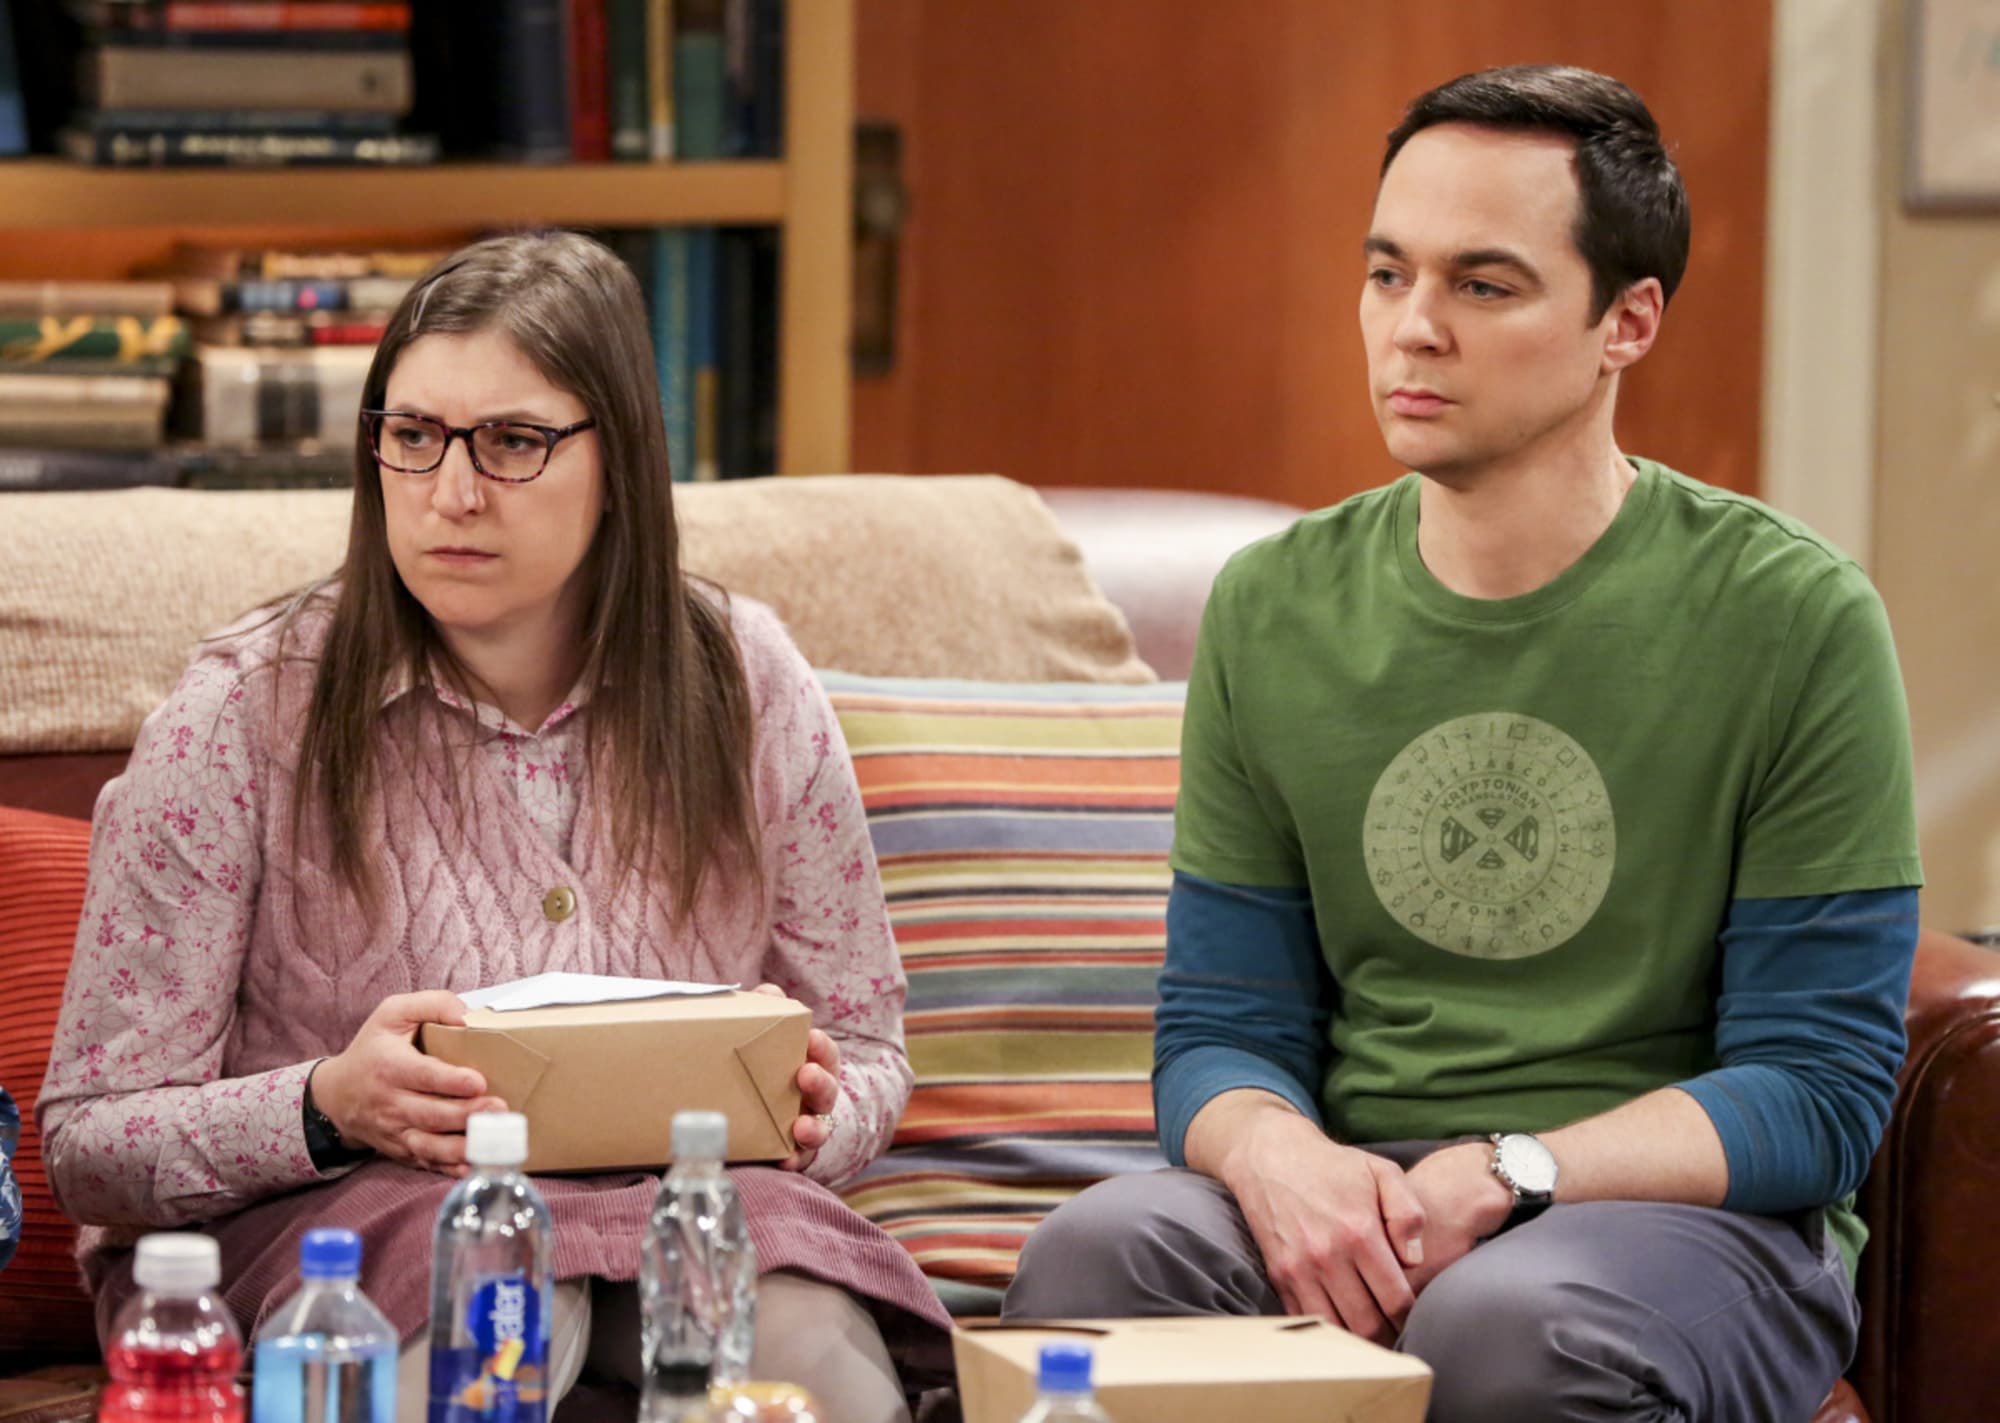 How to watch The Big Bang Theory Season 12, Episode 21 live online